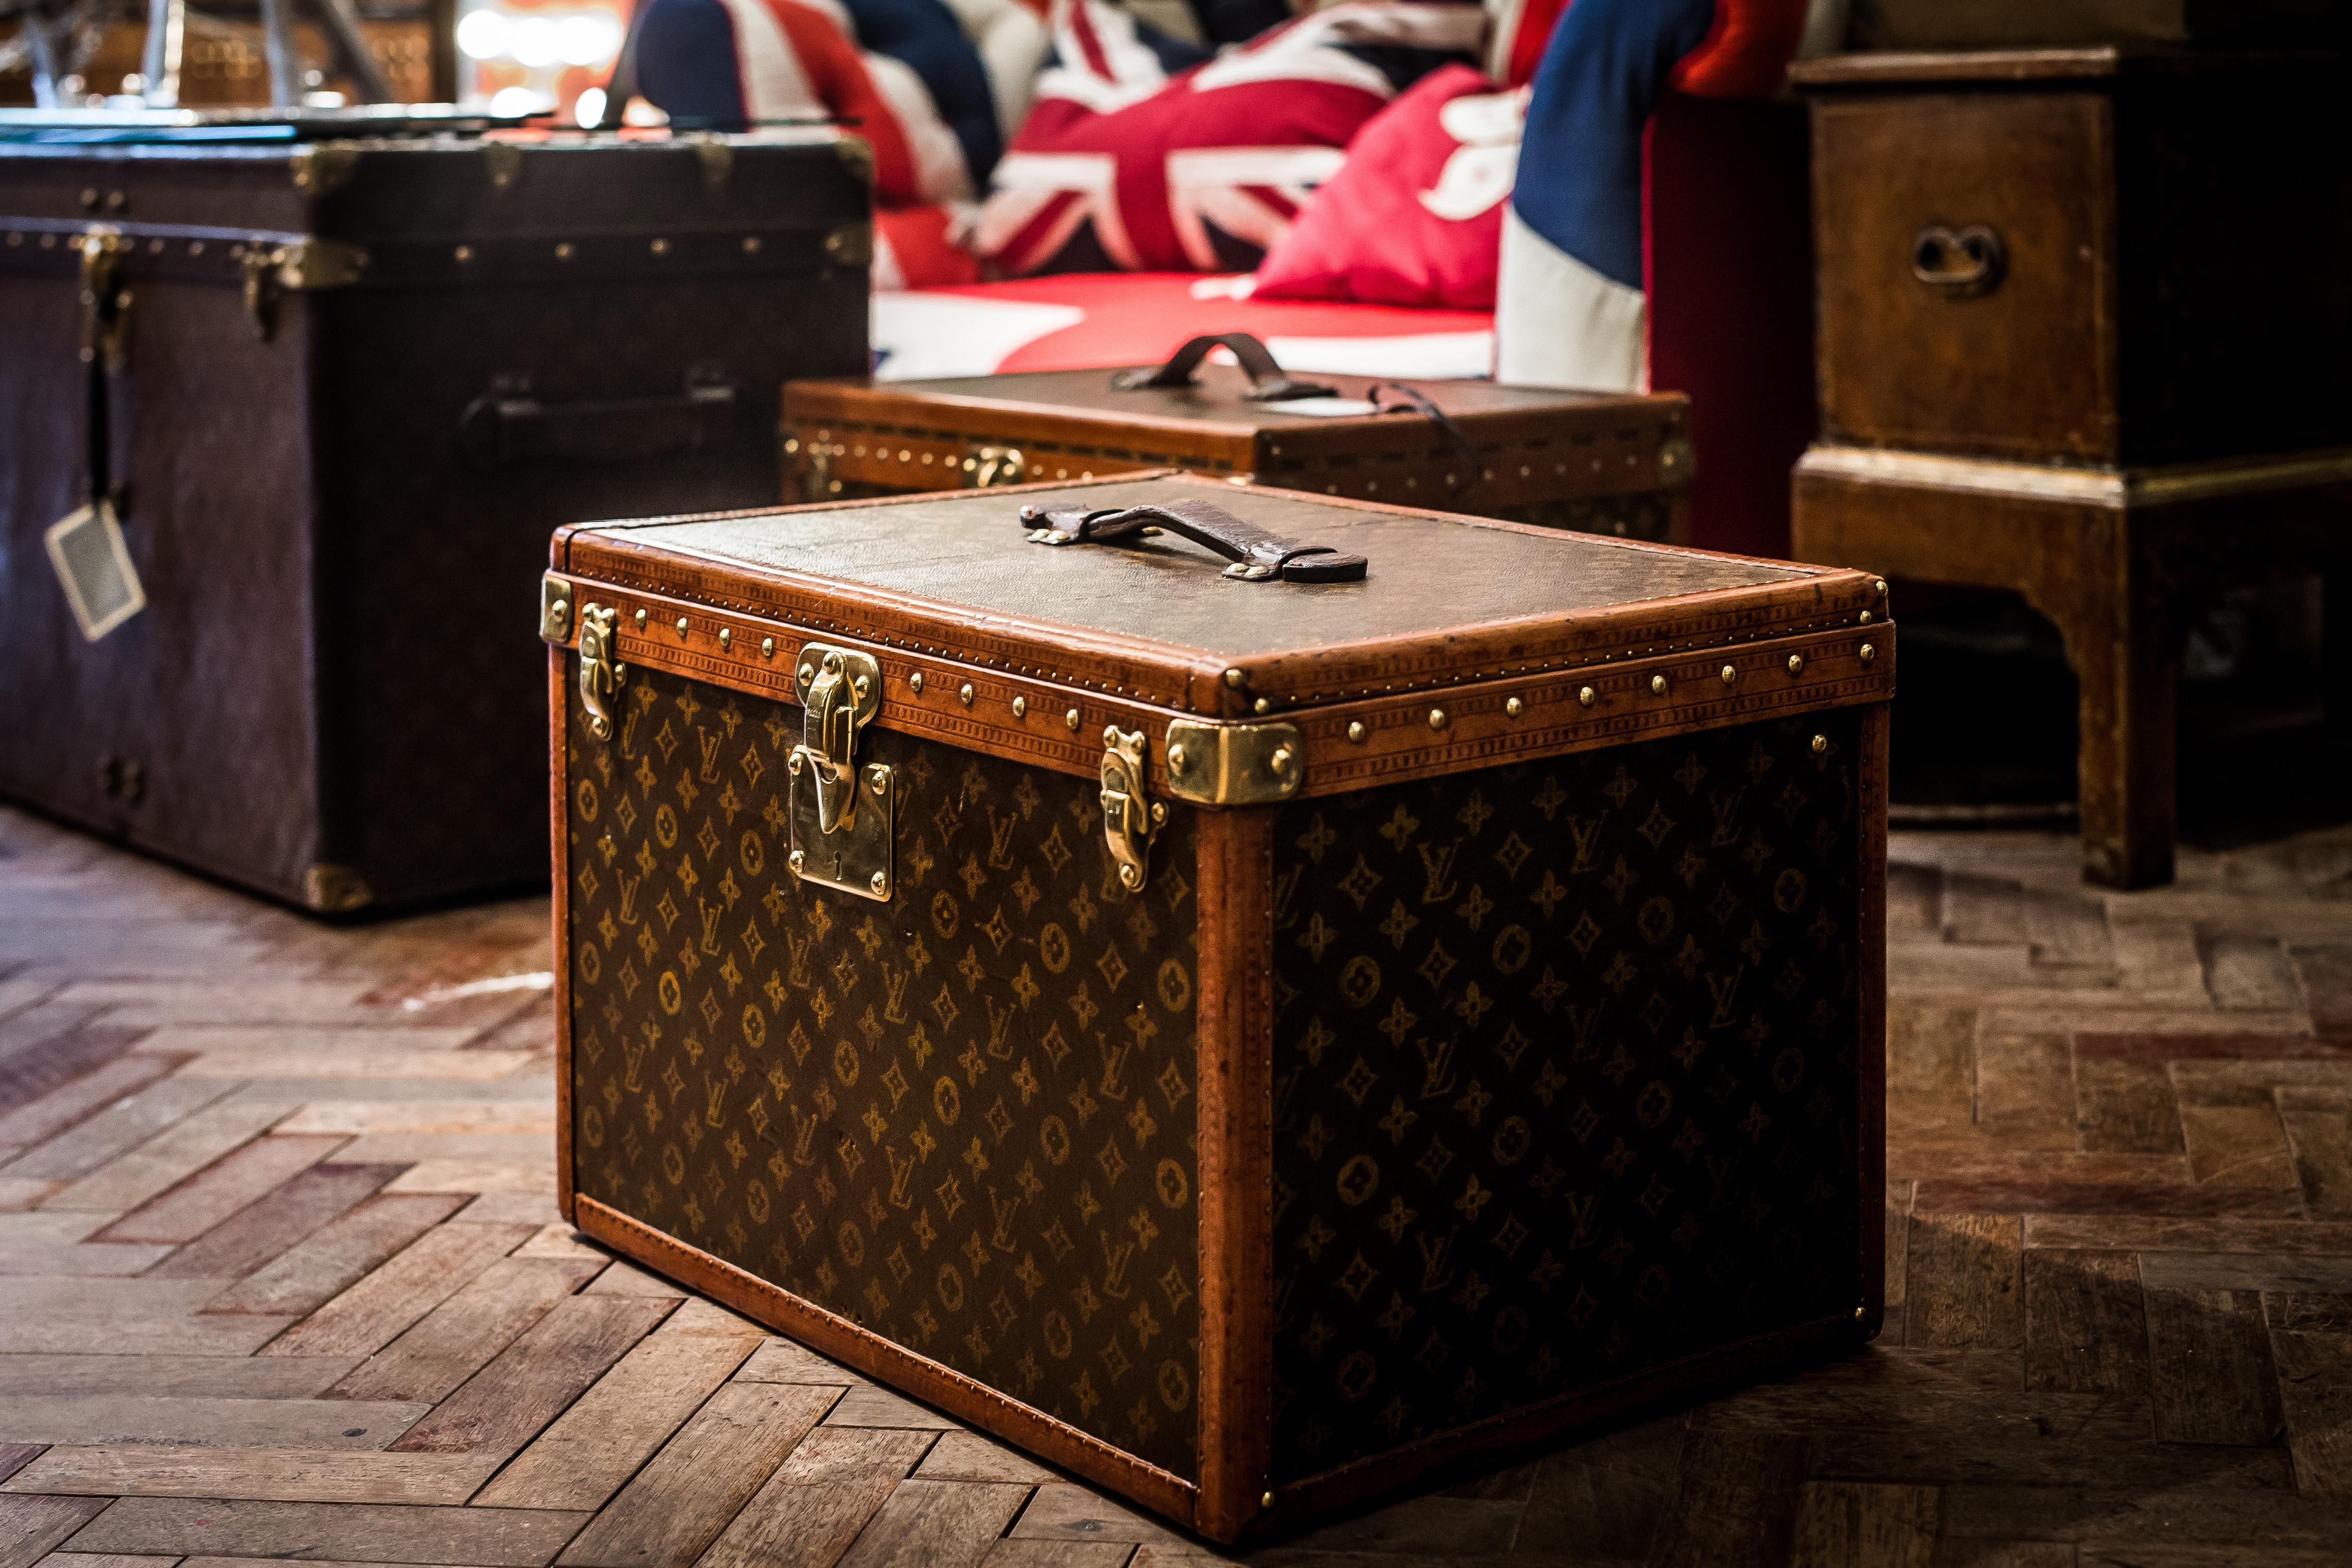 A beautiful Hat trunk that is entirely covered by the signature stencil monogrammed canvas from Louis Vuitton circa 1930s. 

It features:
- Lozine trim, 
- Brass hardware. 
- a leather handle on the top of the trunk

The spacious interior features